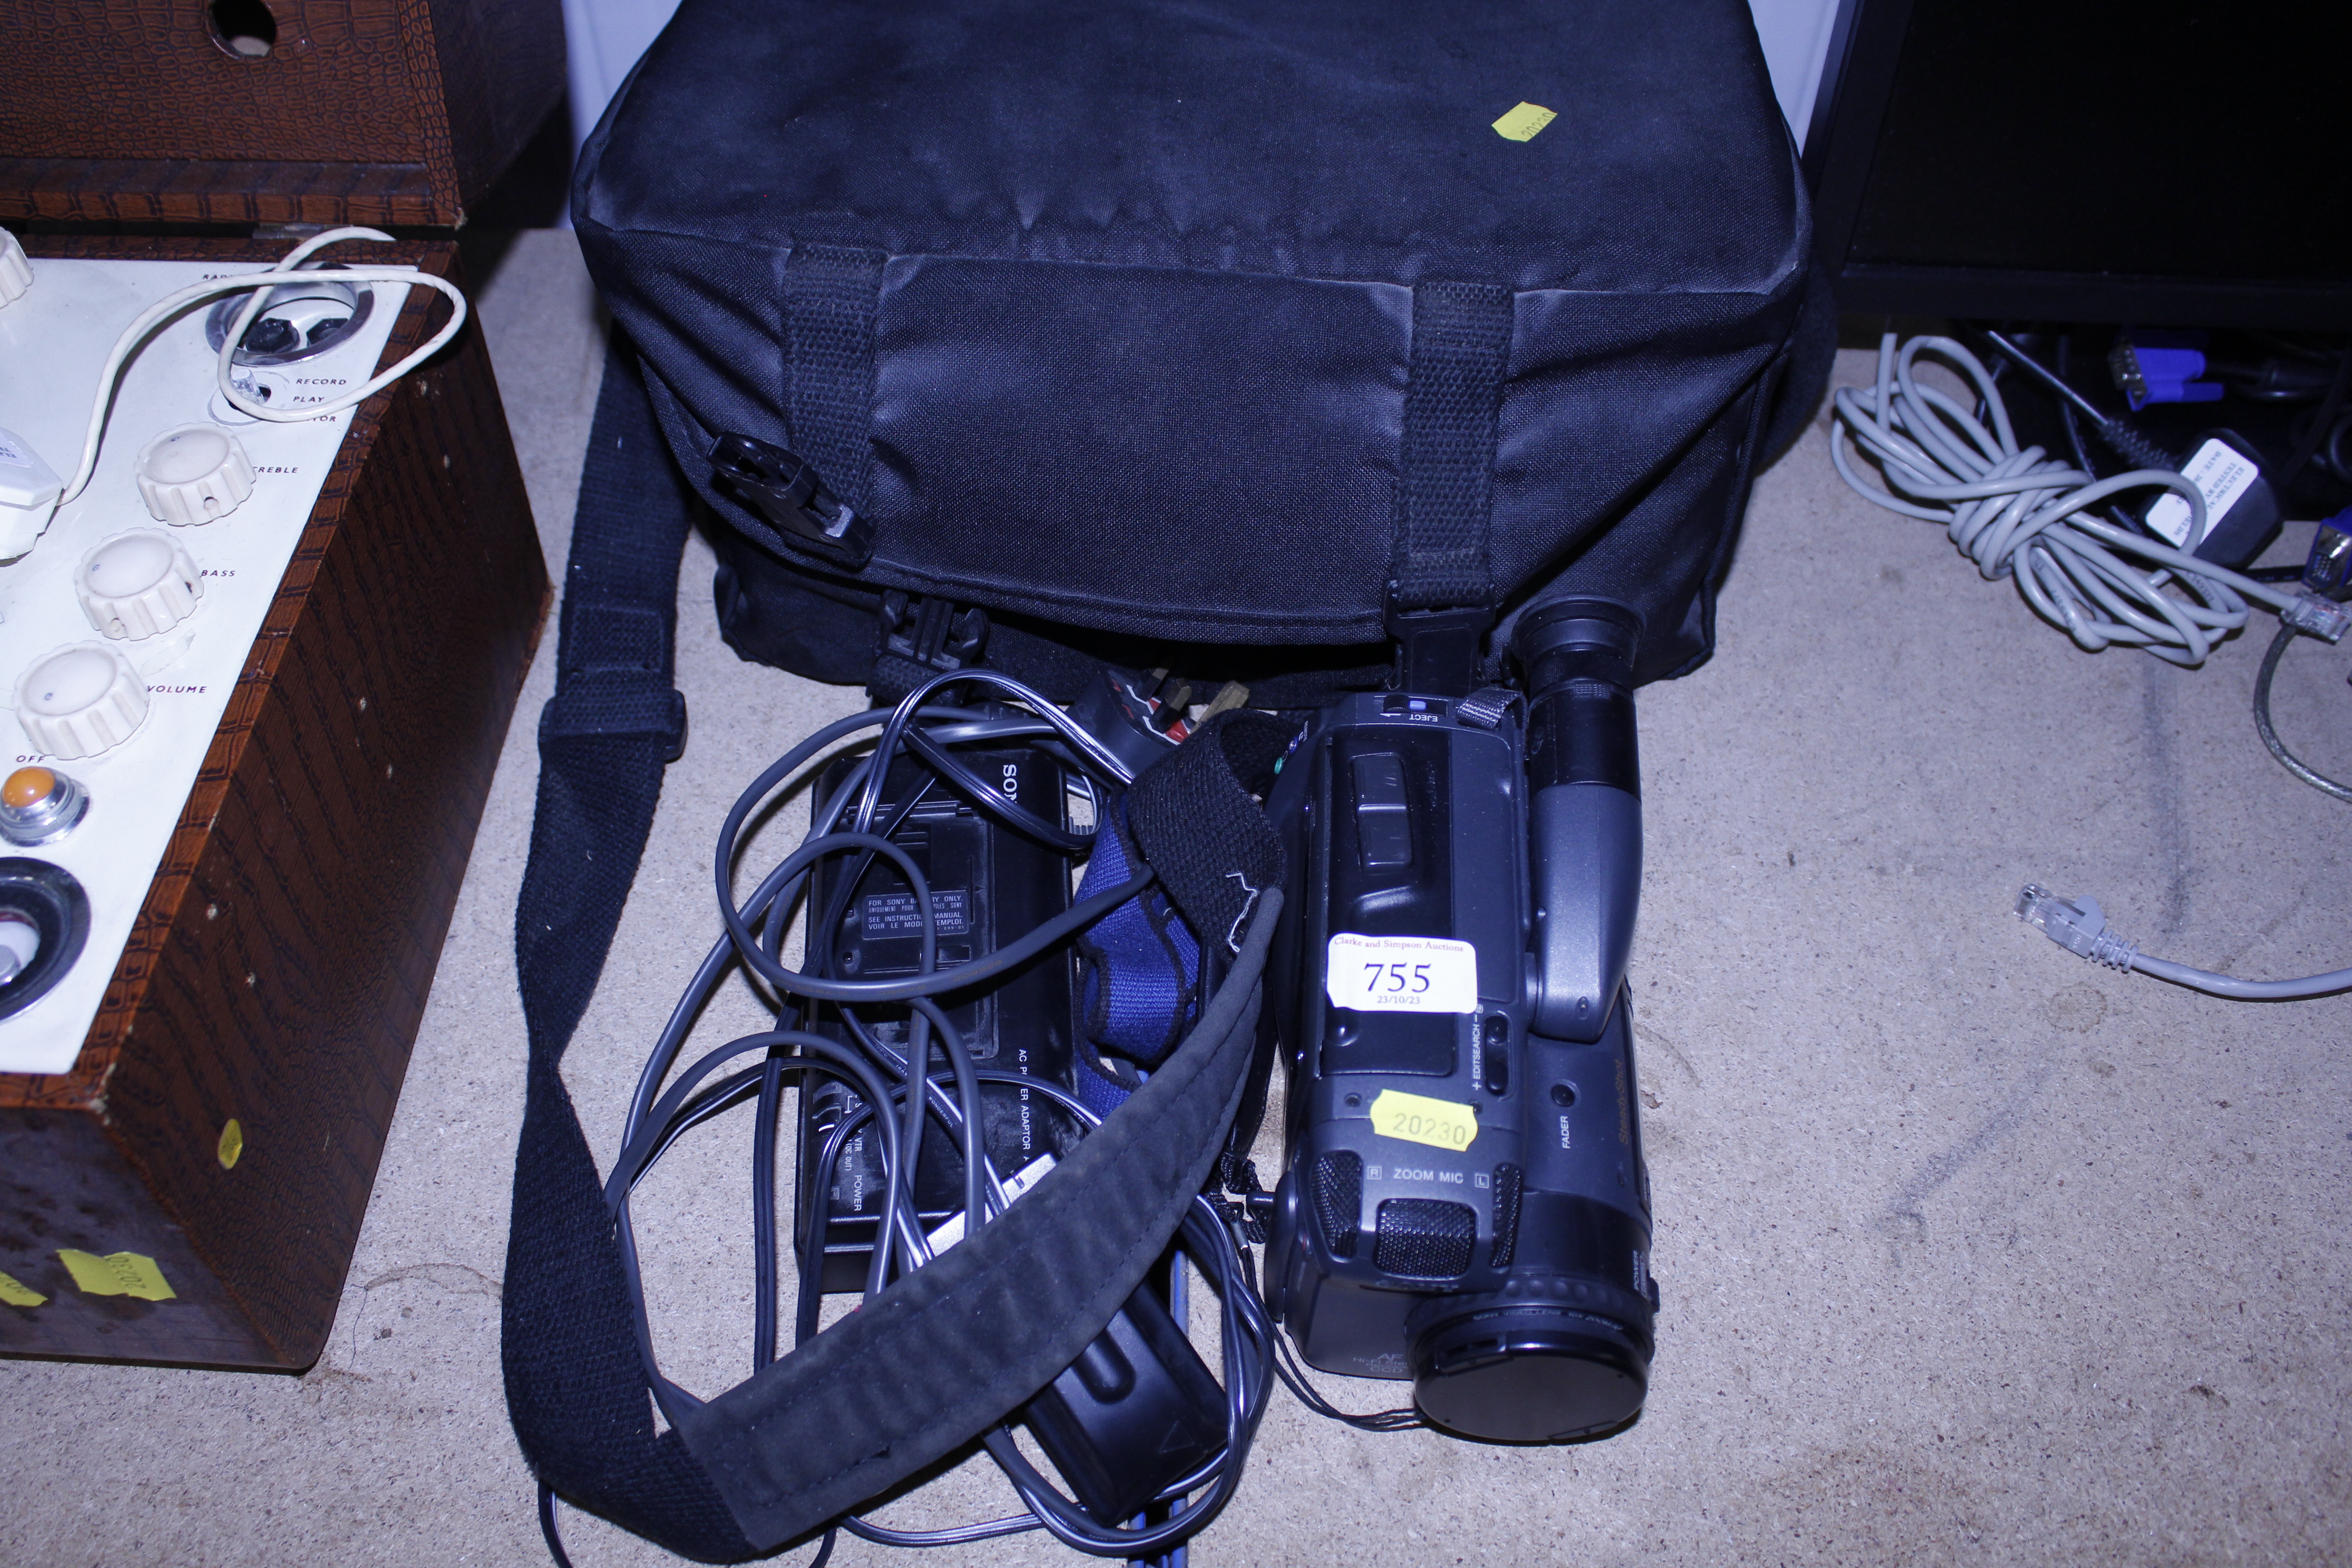 A Sony Handycam with accessories and carrying bag